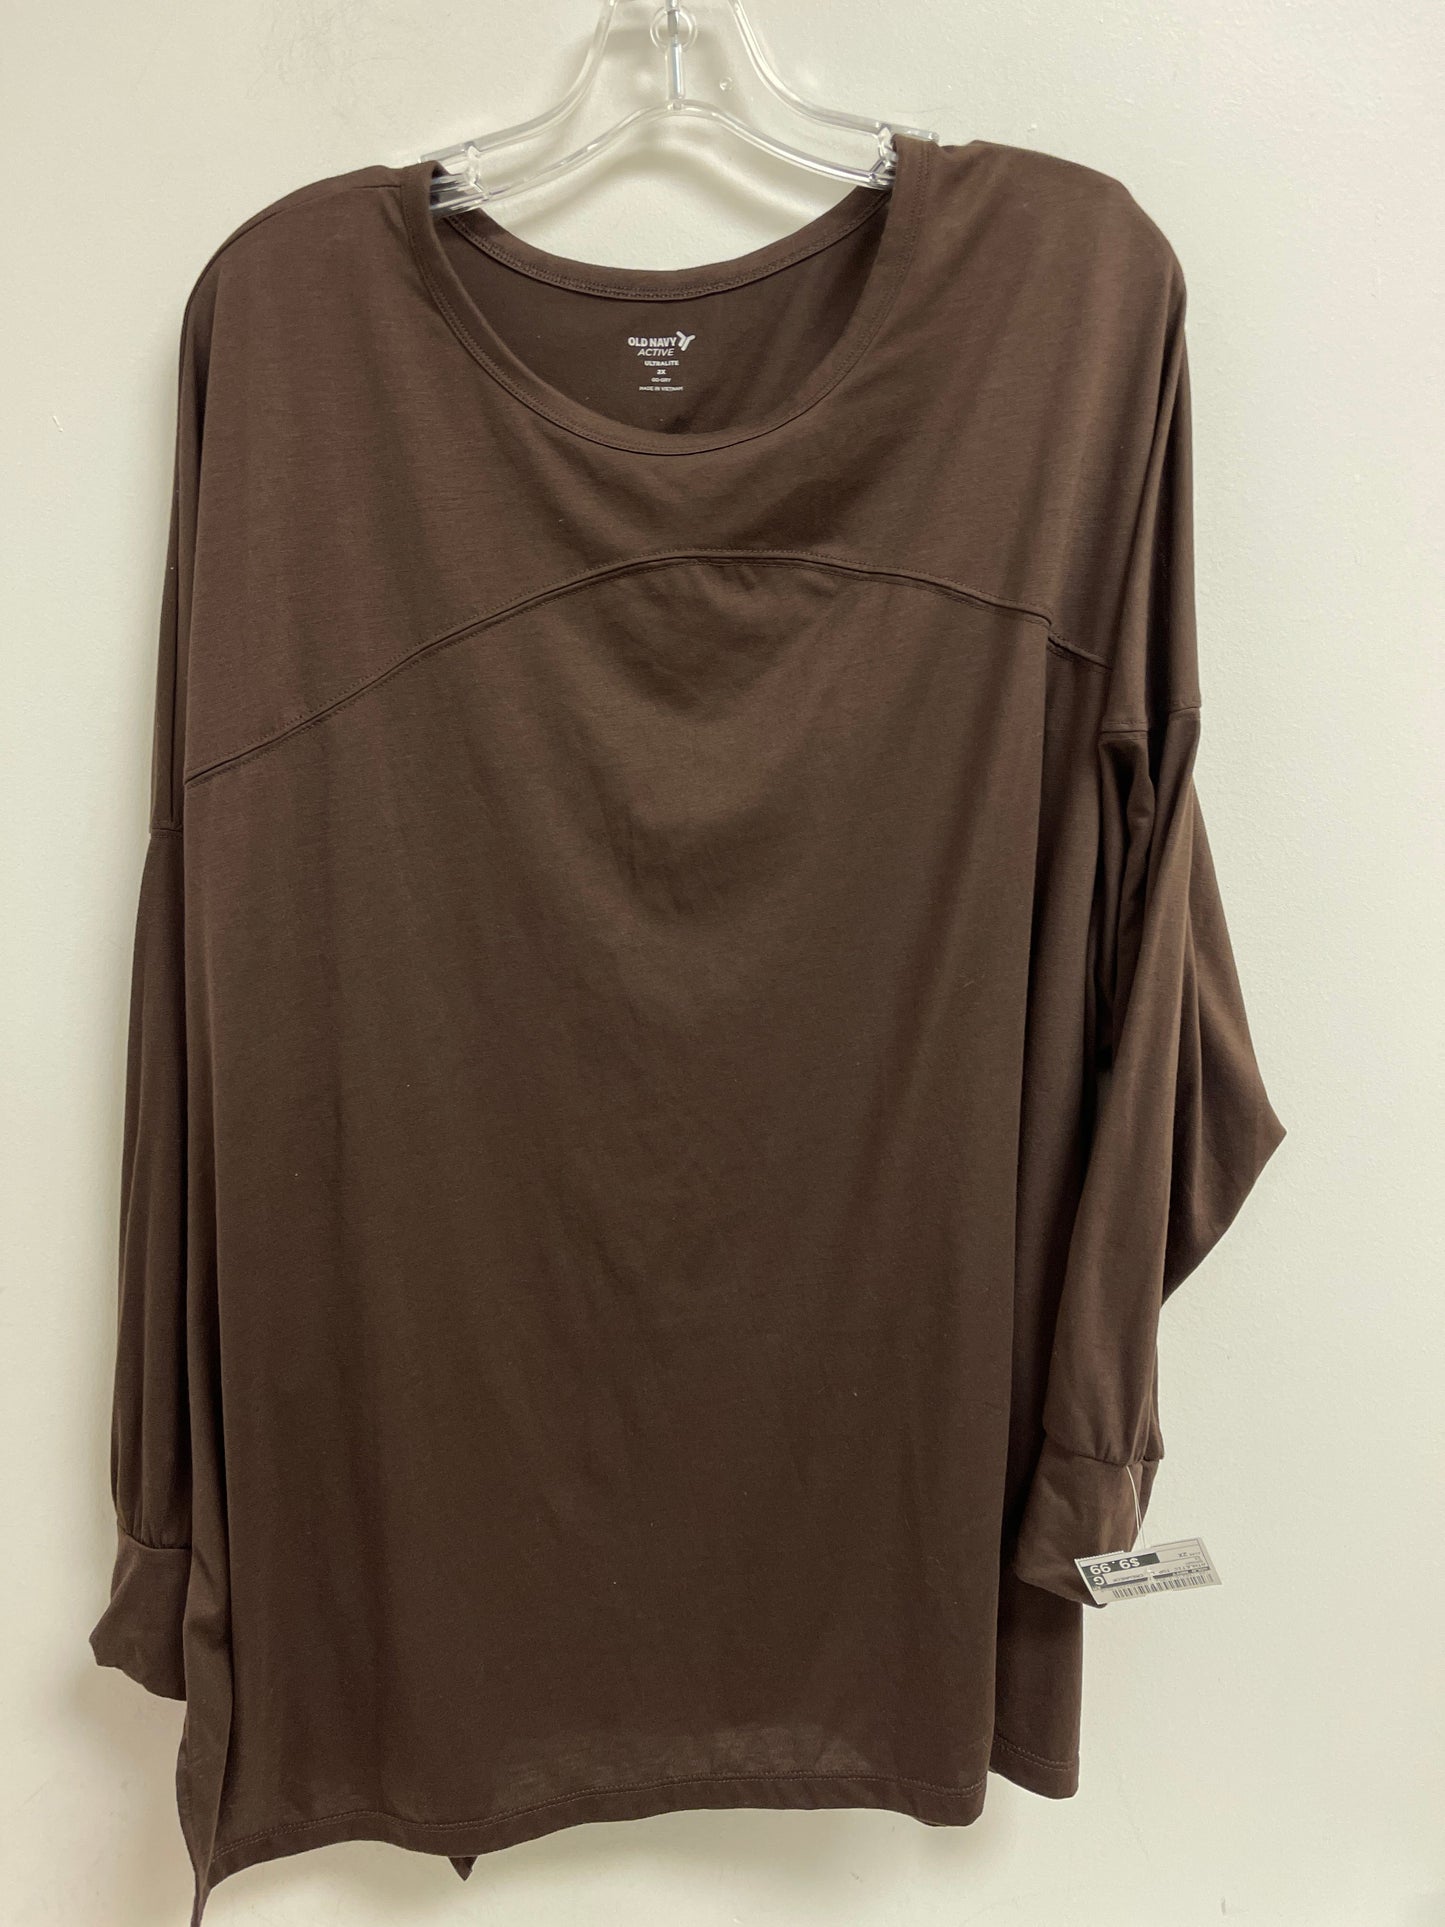 Brown Athletic Top Long Sleeve Crewneck Old Navy, Size 2x